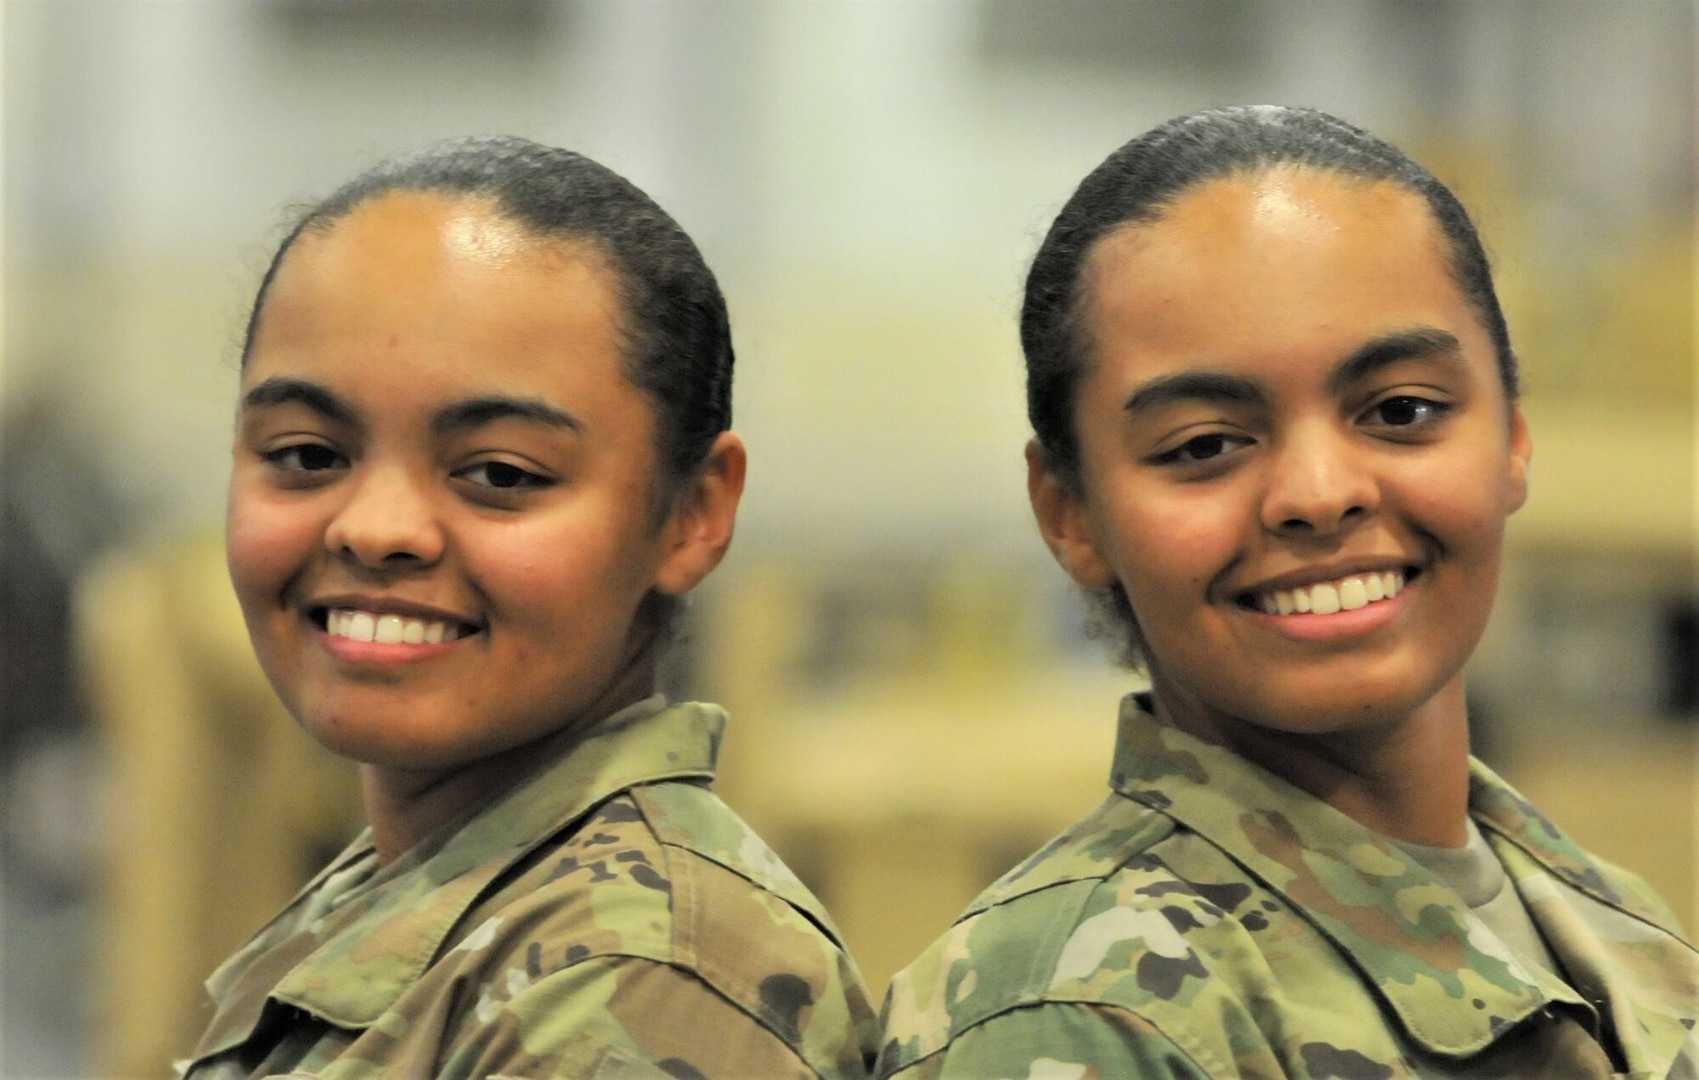 Pvts. Jaiden and Teagen Gregory pose for a photo in the shop training area of the Ordnance School’s Stever Hall at Fort Lee, Virginia. The twins, trained as 91B wheeled vehicle mechanics, said they’re grateful to the Army National Guard for giving them a head start on their careers after quitting high school to support their family.